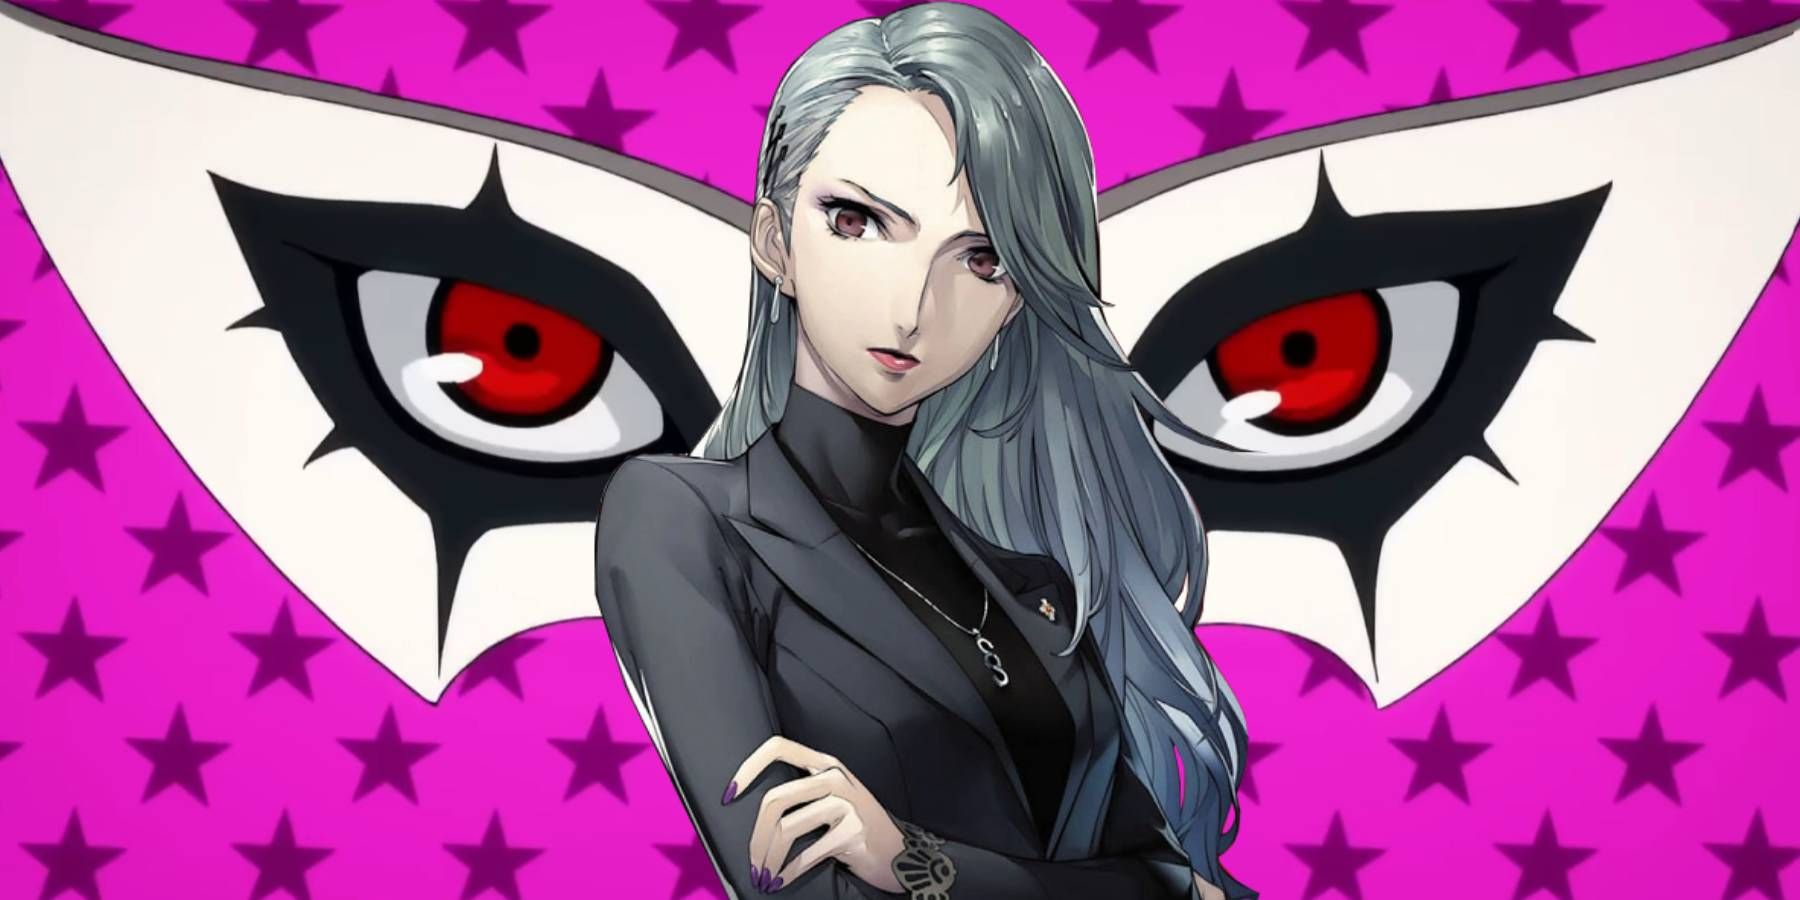 Sae Niijima in front of Joker's mask from the intro of Persona 5 Royal